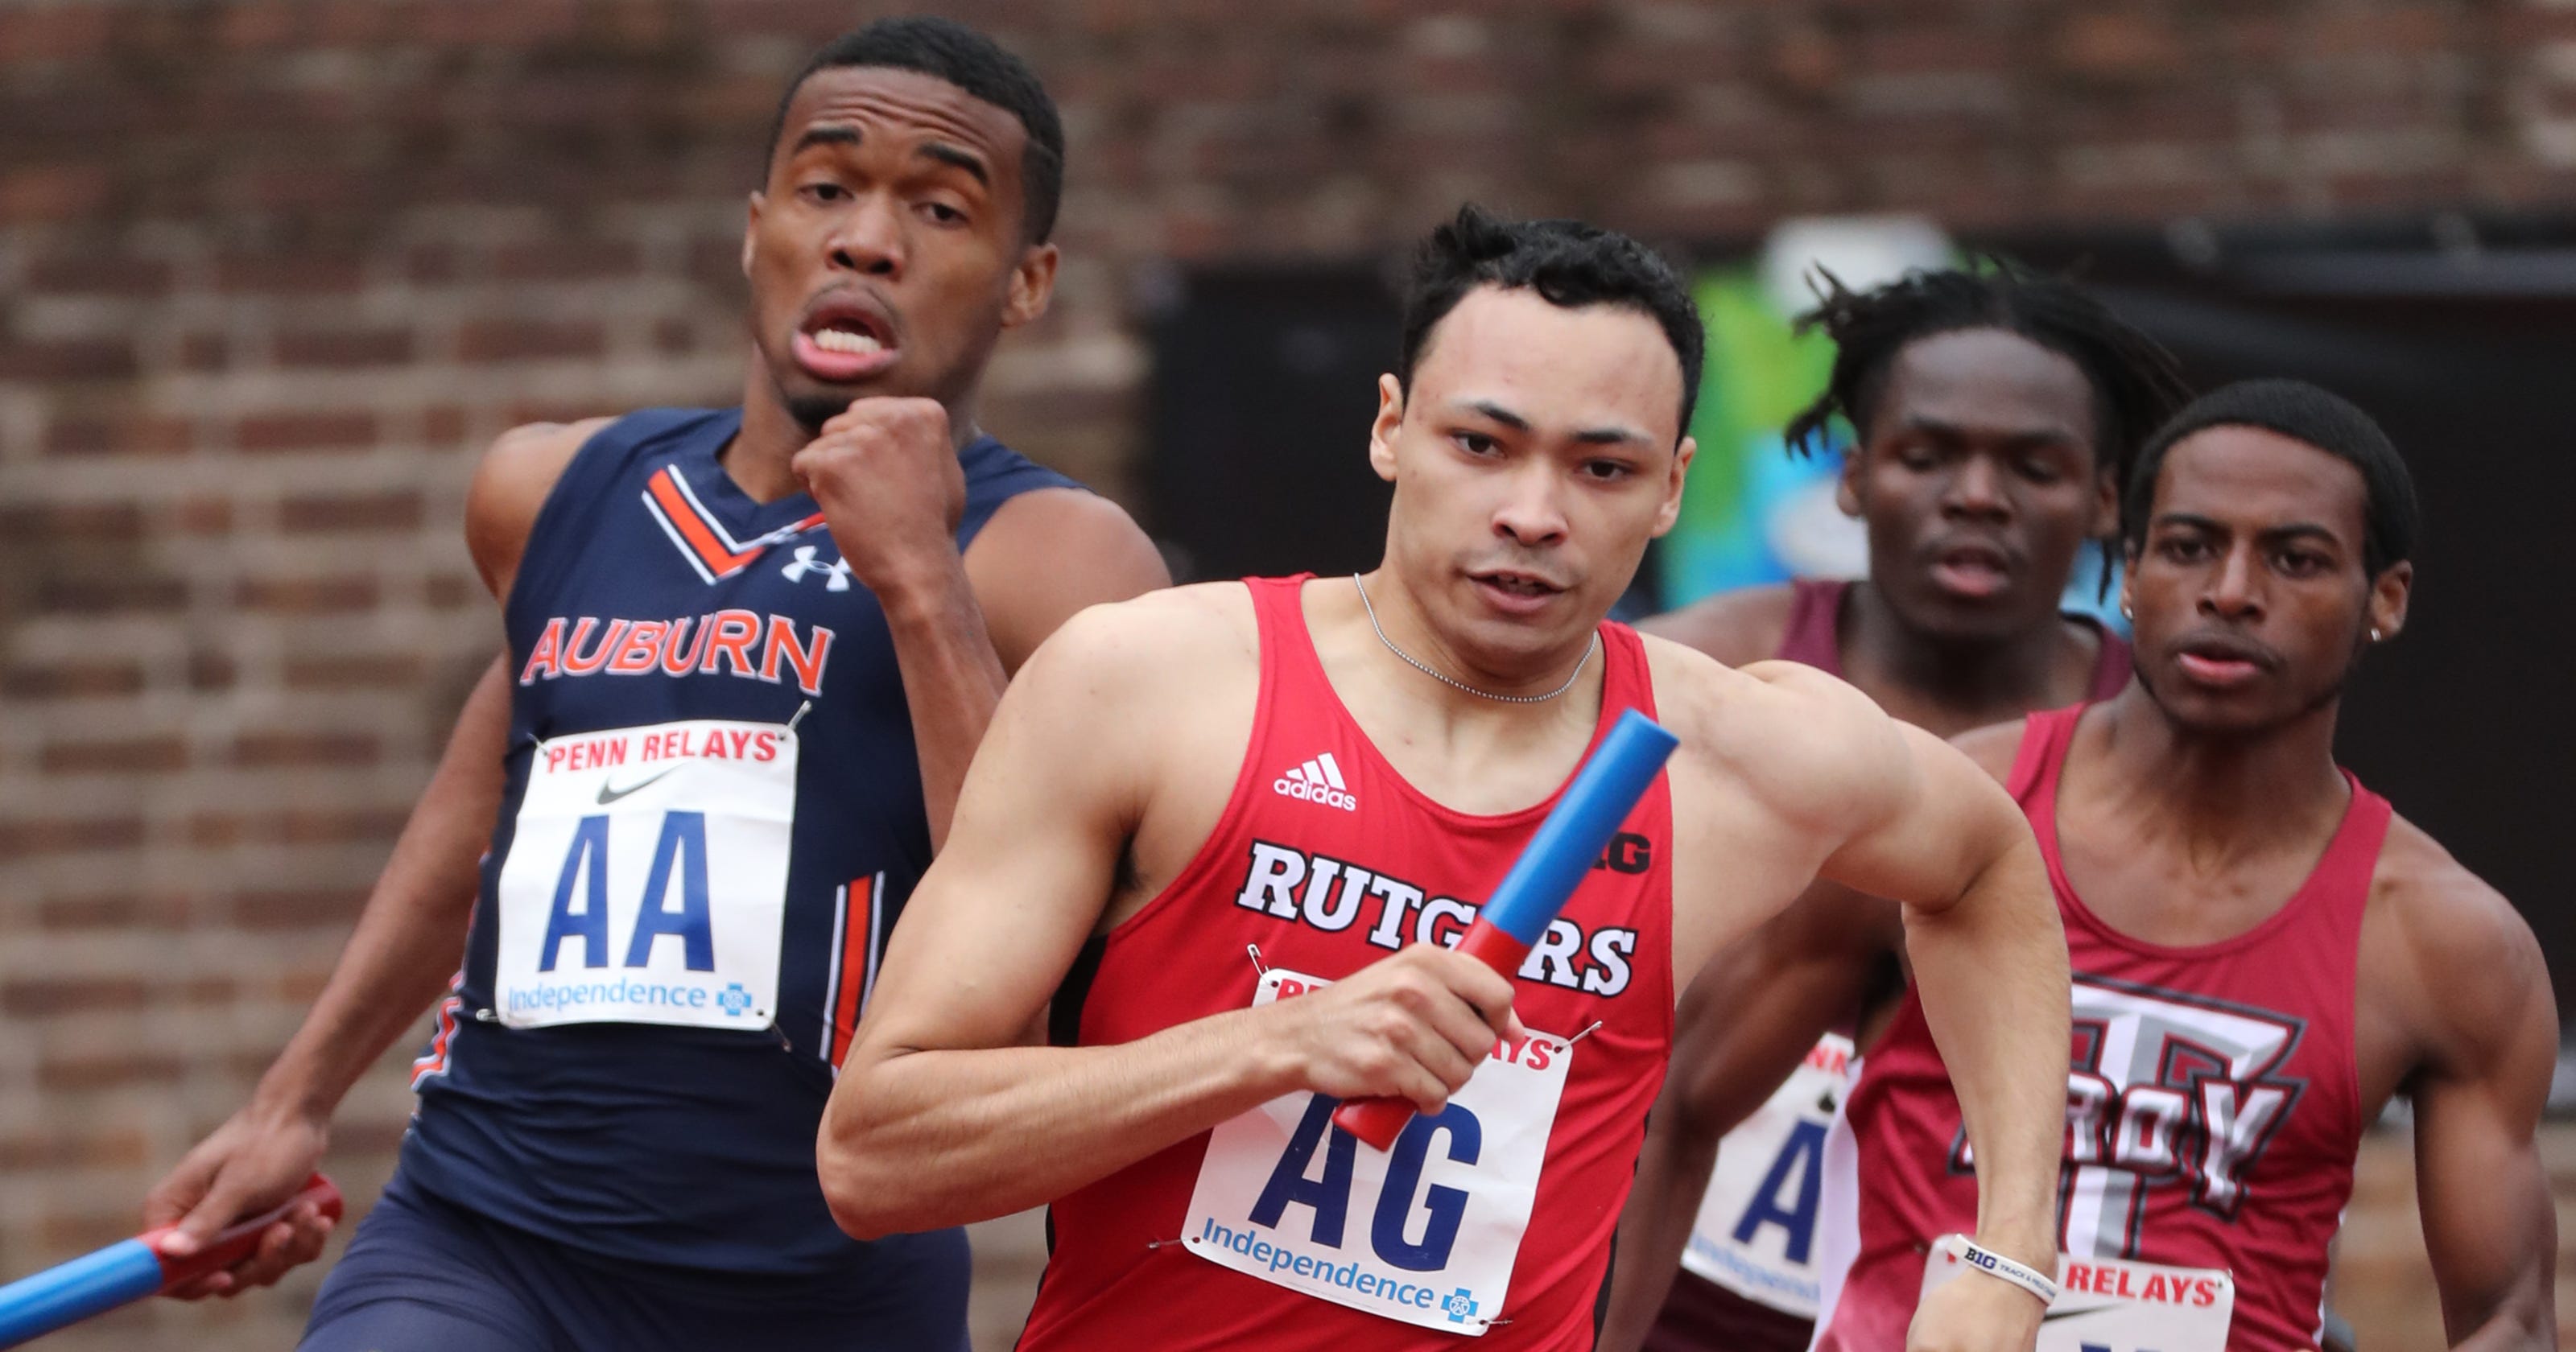 Penn Relays Rutgers men's 4x400 earns 2nd seed in championship race